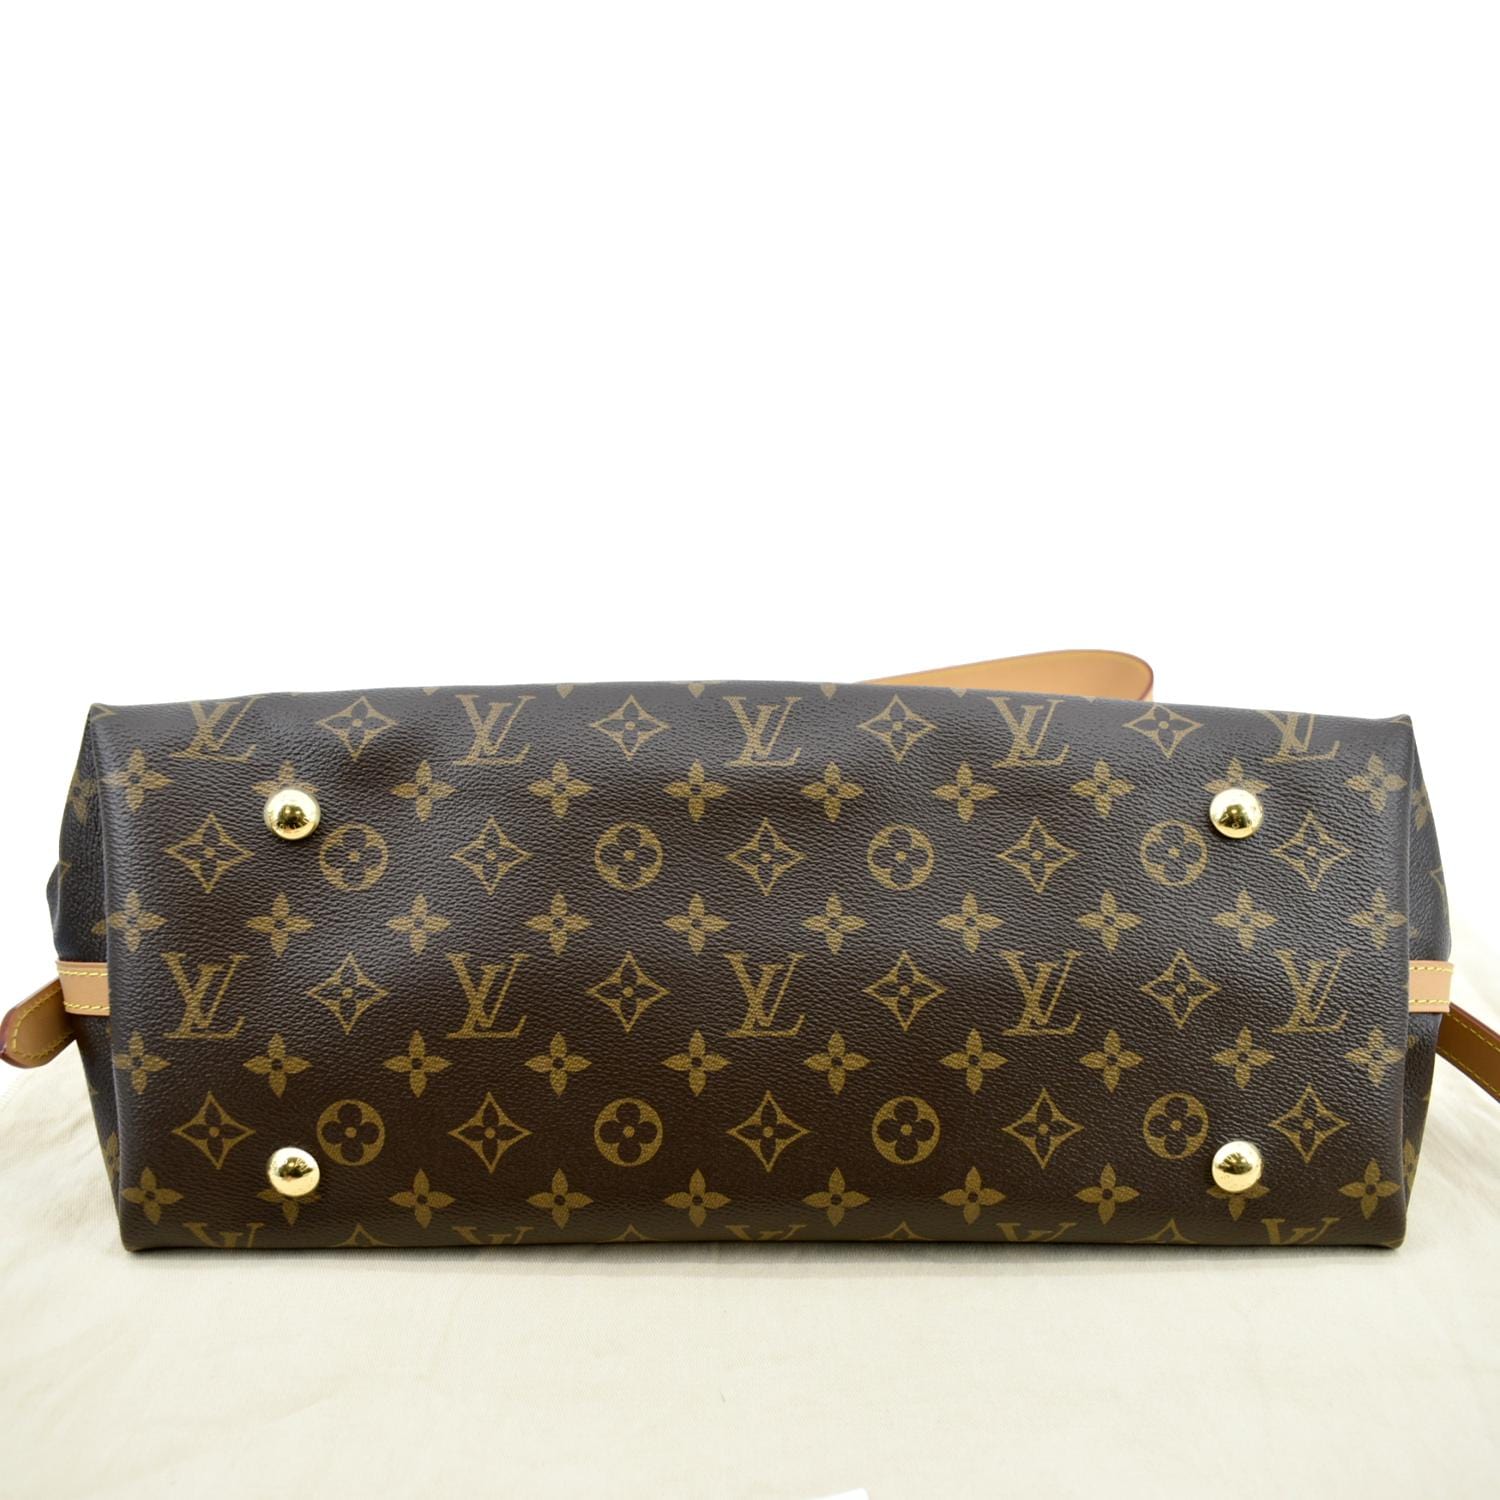 Louis Vuitton Carryall MM wristlet pouch only